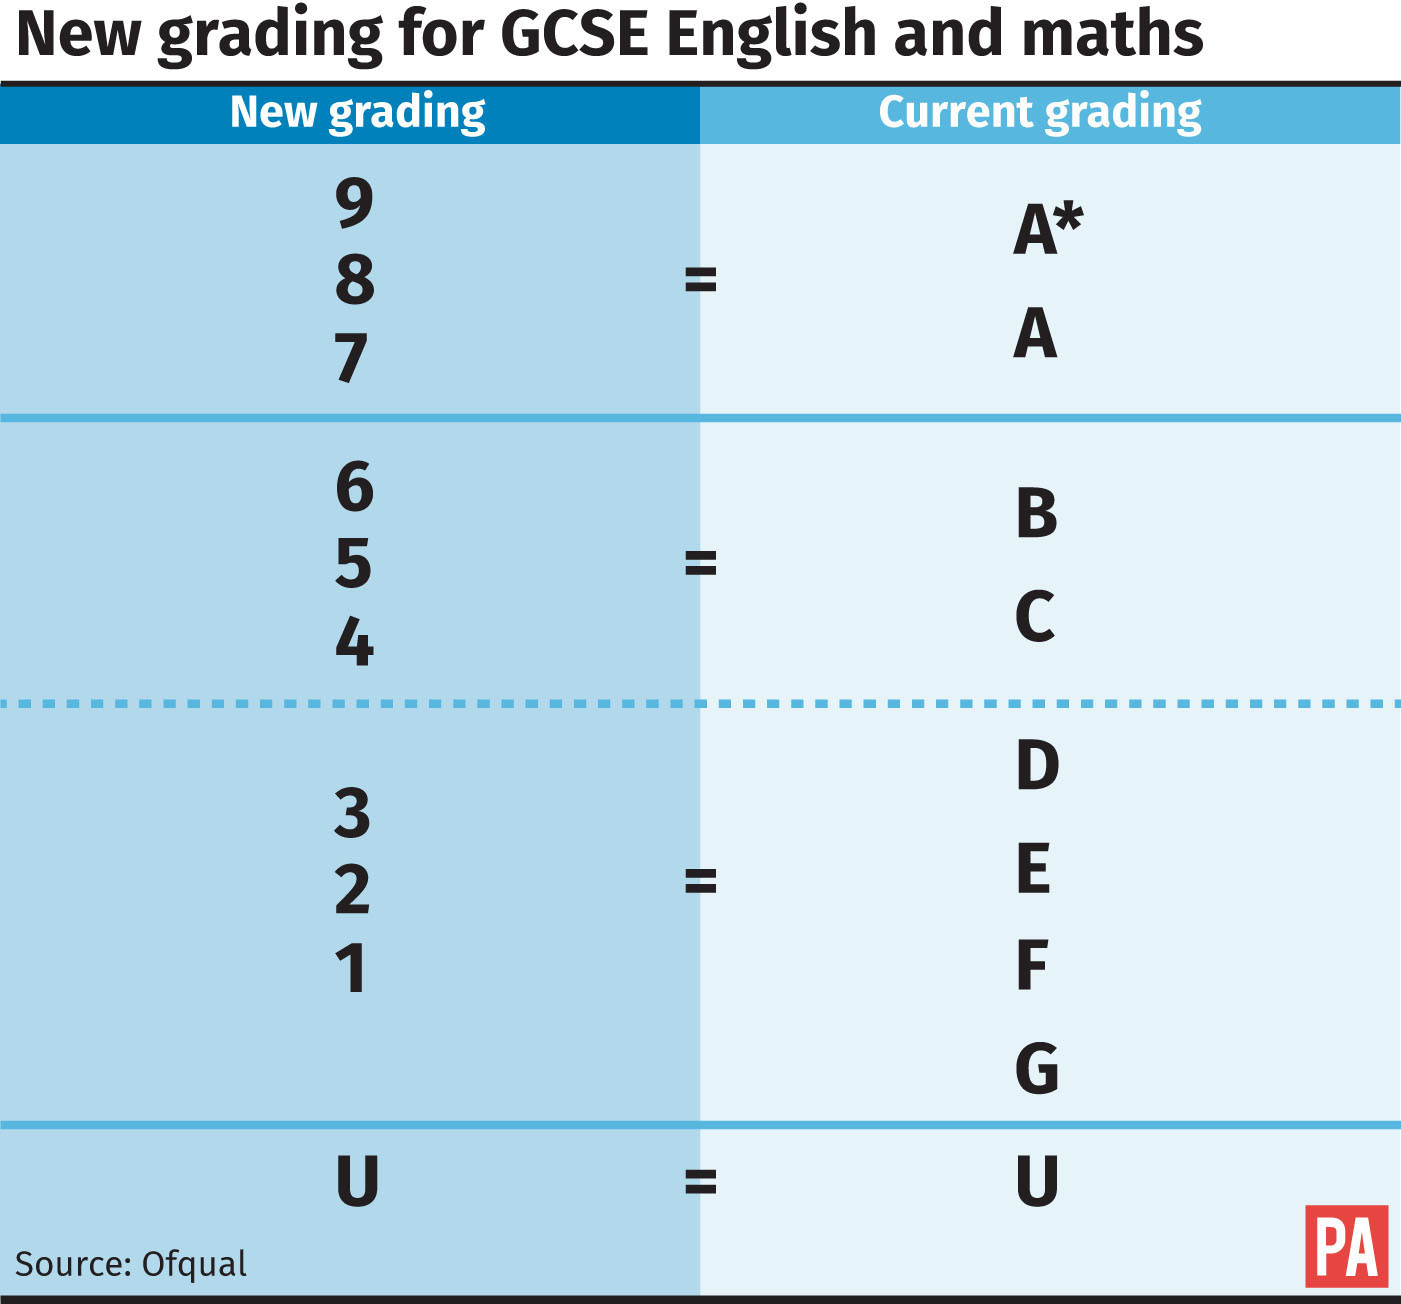 5-better-ways-gcses-could-be-graded-shropshire-star